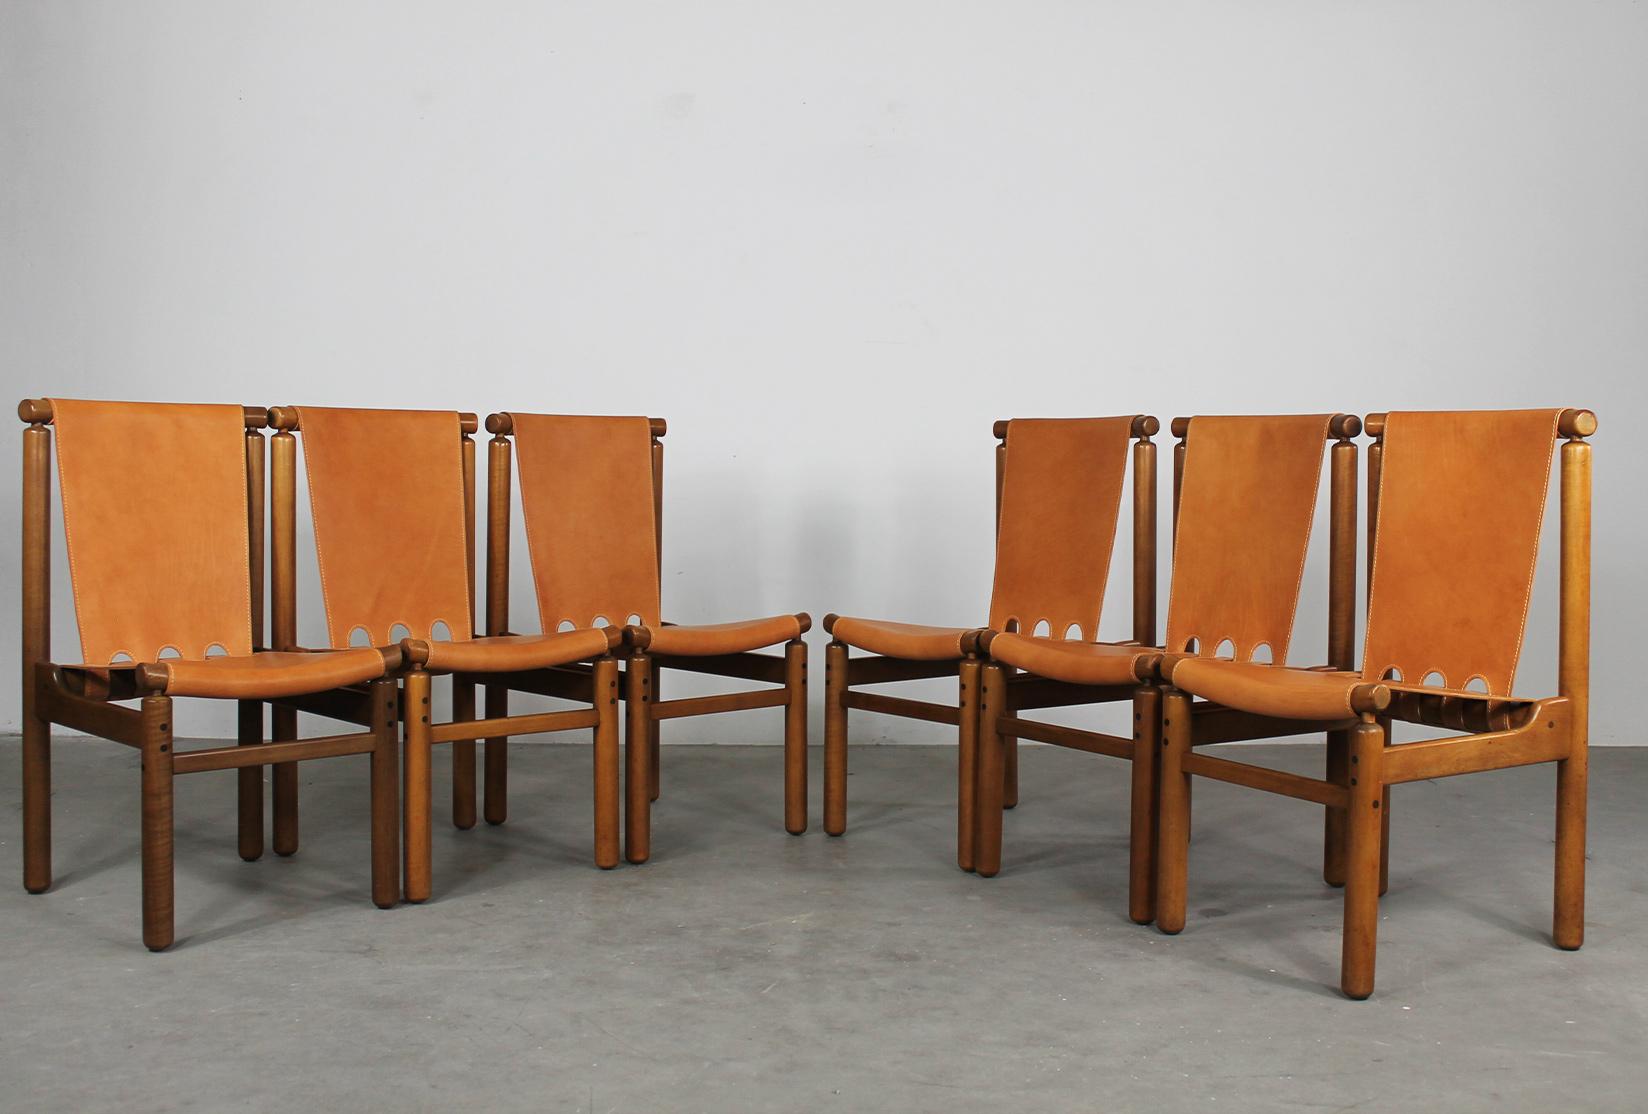 Set of six dining chairs with wooden frame, seat and back in leather designed by Ilmari Tapiovaara and produced by La Permanente Mobili Cantù in 1950s. 

This set of chairs presents a beautiful solid structure given by the geometrical shape of the